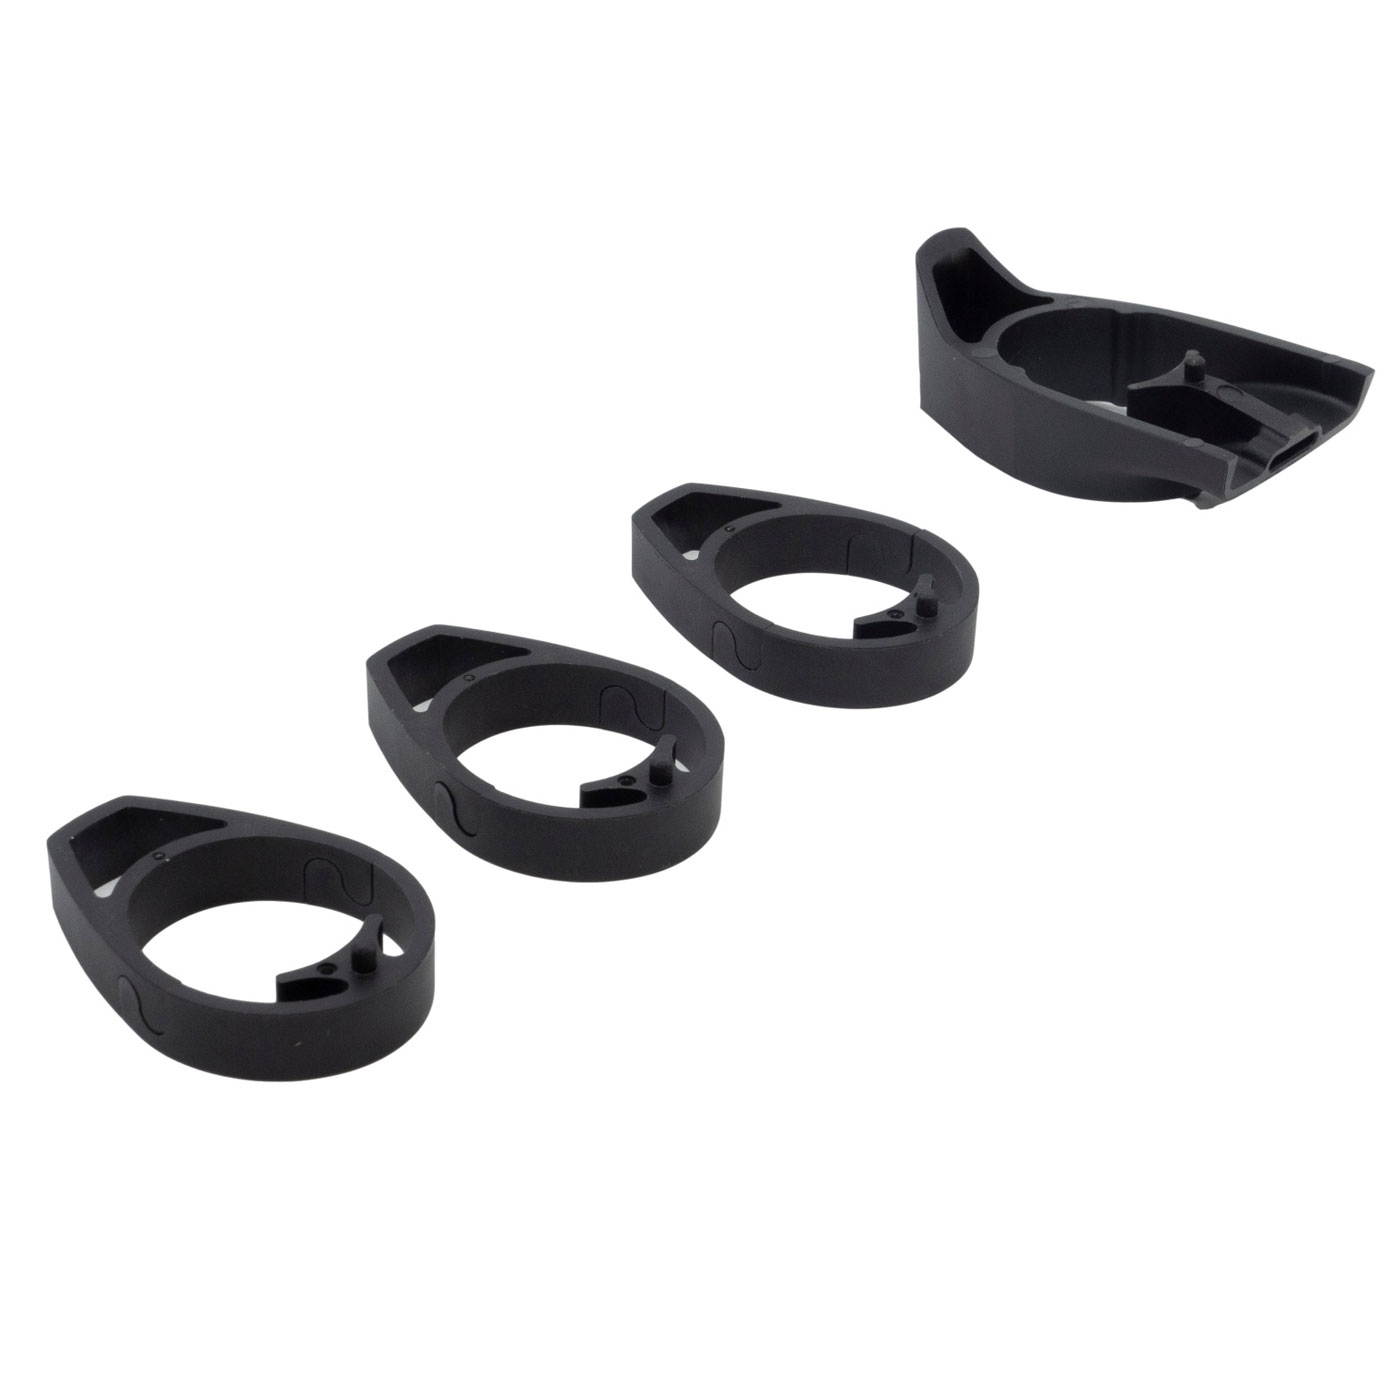 Picture of BMC PA Spacer Kit for ICS01 Stem - 301281